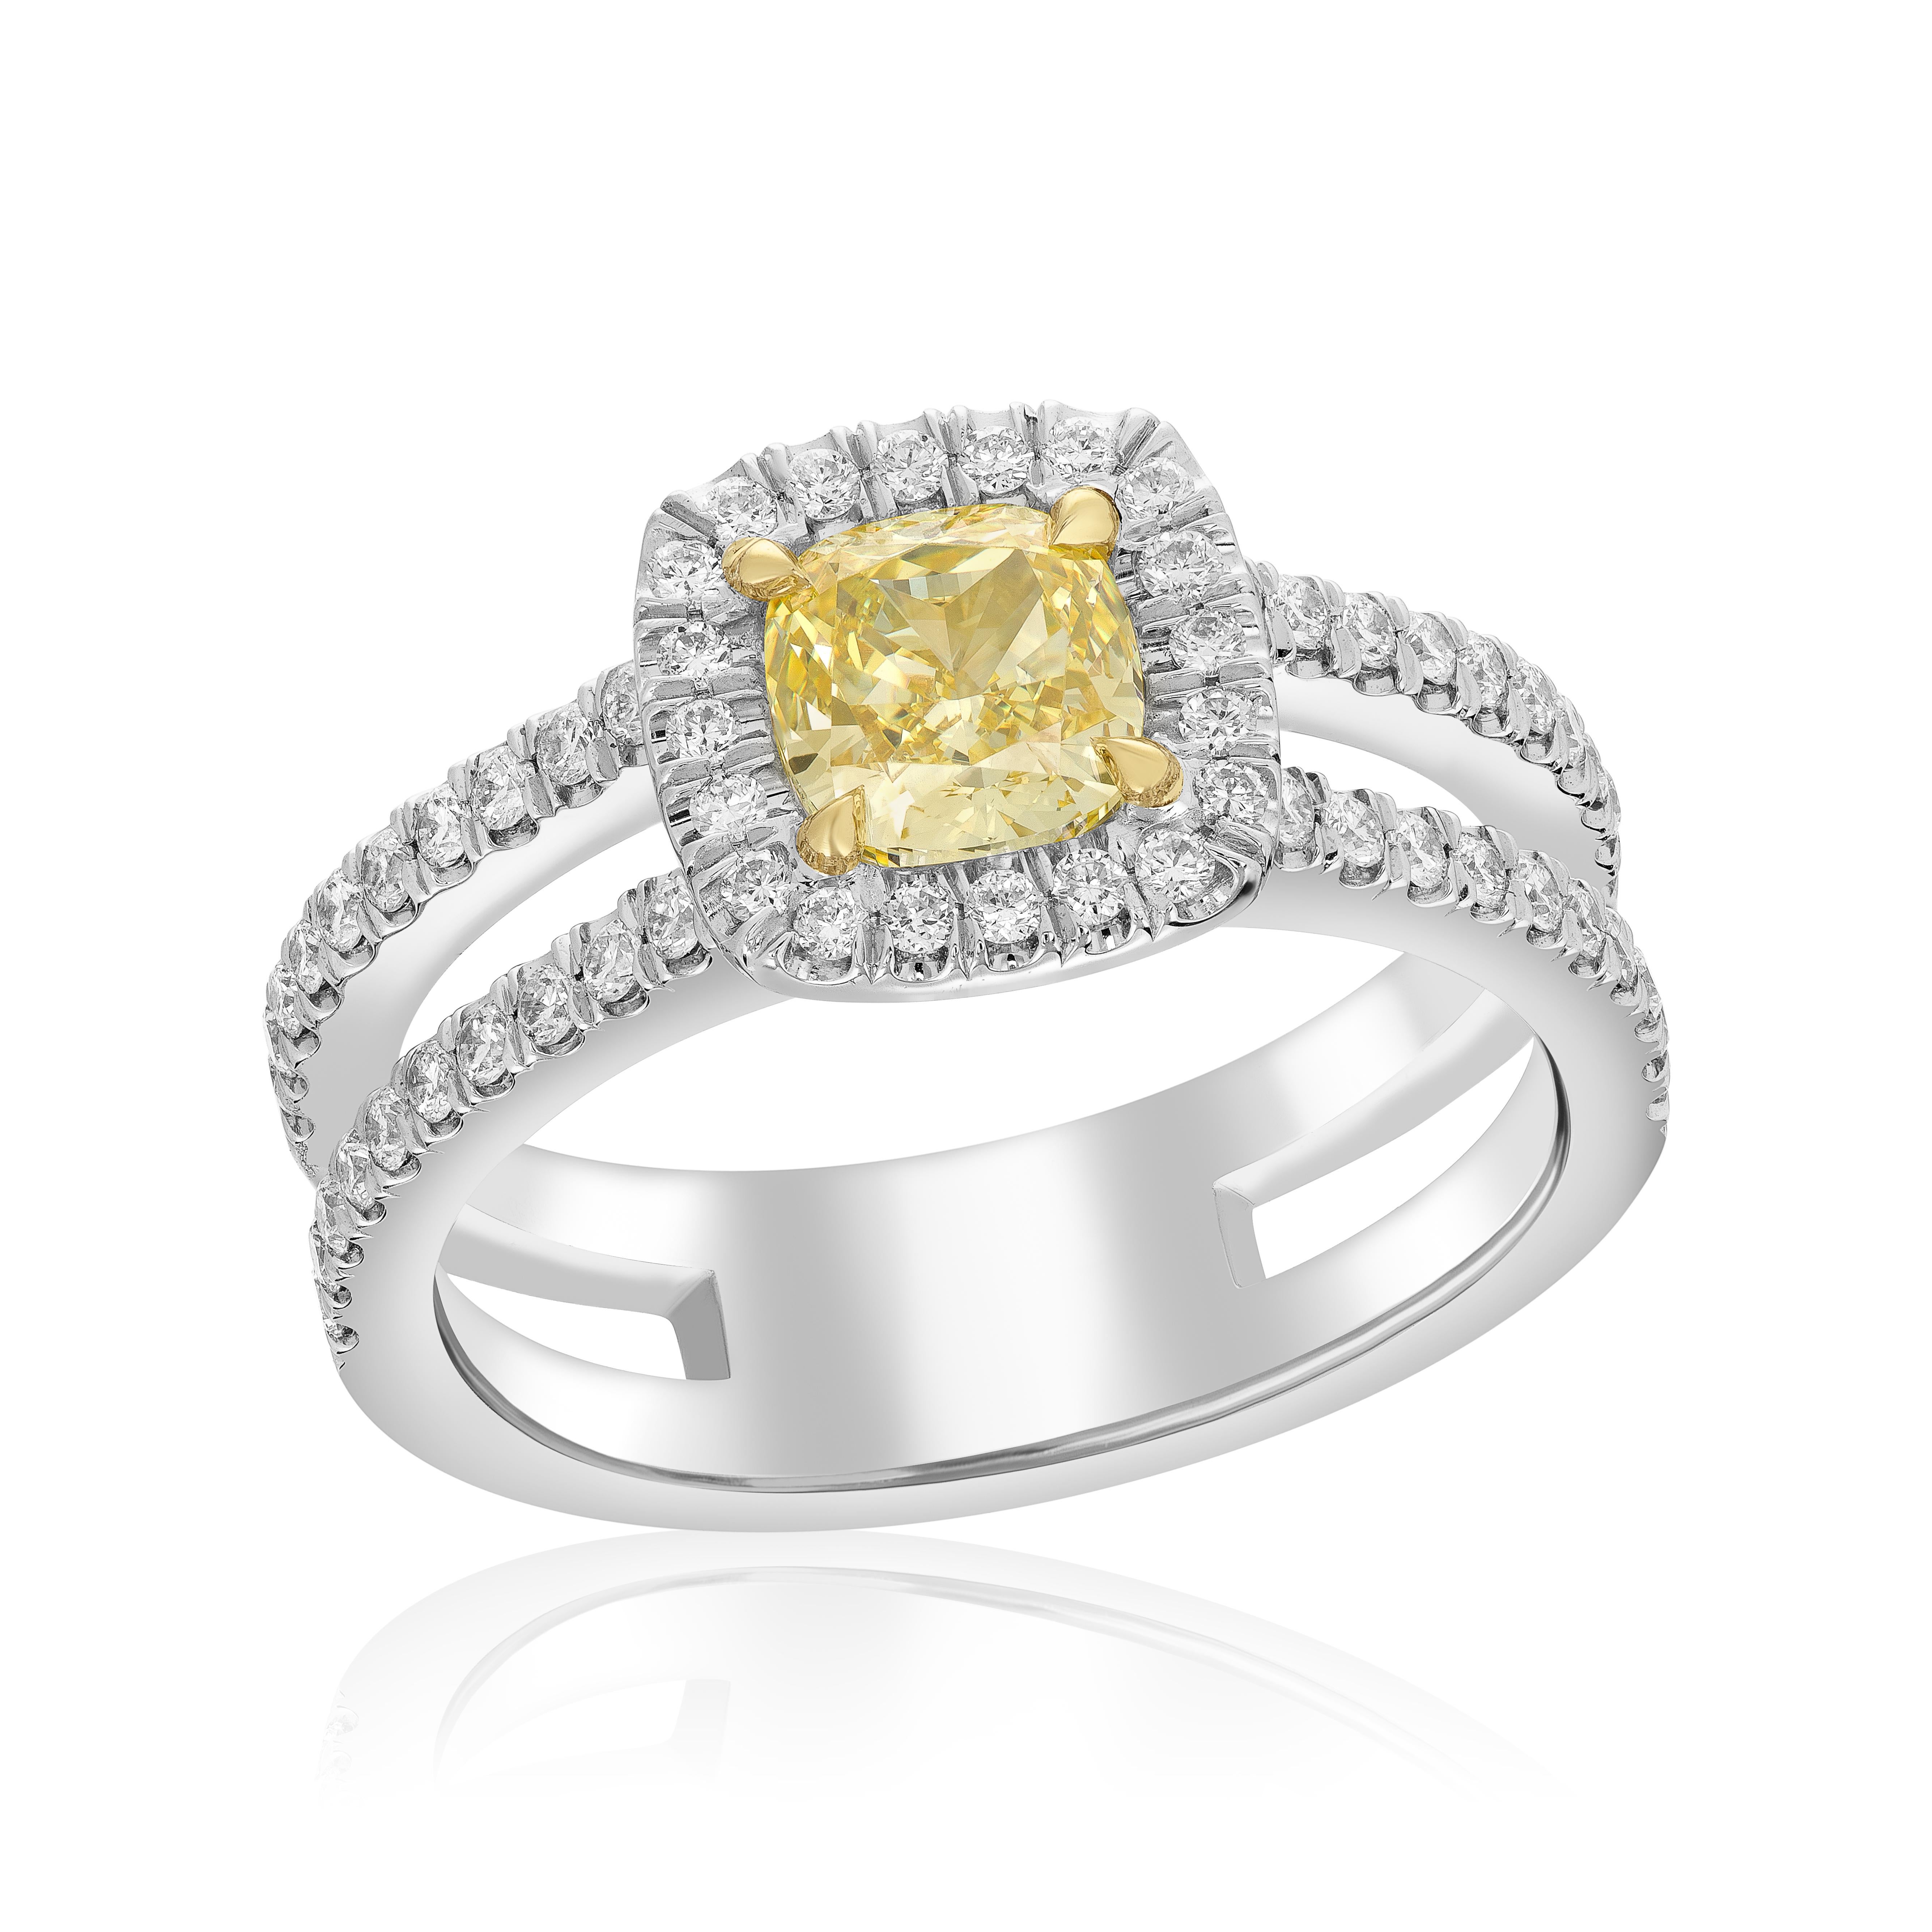 Make a statement with this stunning handmade double-shank halo ring! This one-of-a-kind ring features a beautiful 1.01 carat fancy intense yellow cushion, SI1, certified by the esteemed GIA with a unique number of 1349145507. The cushion is set in